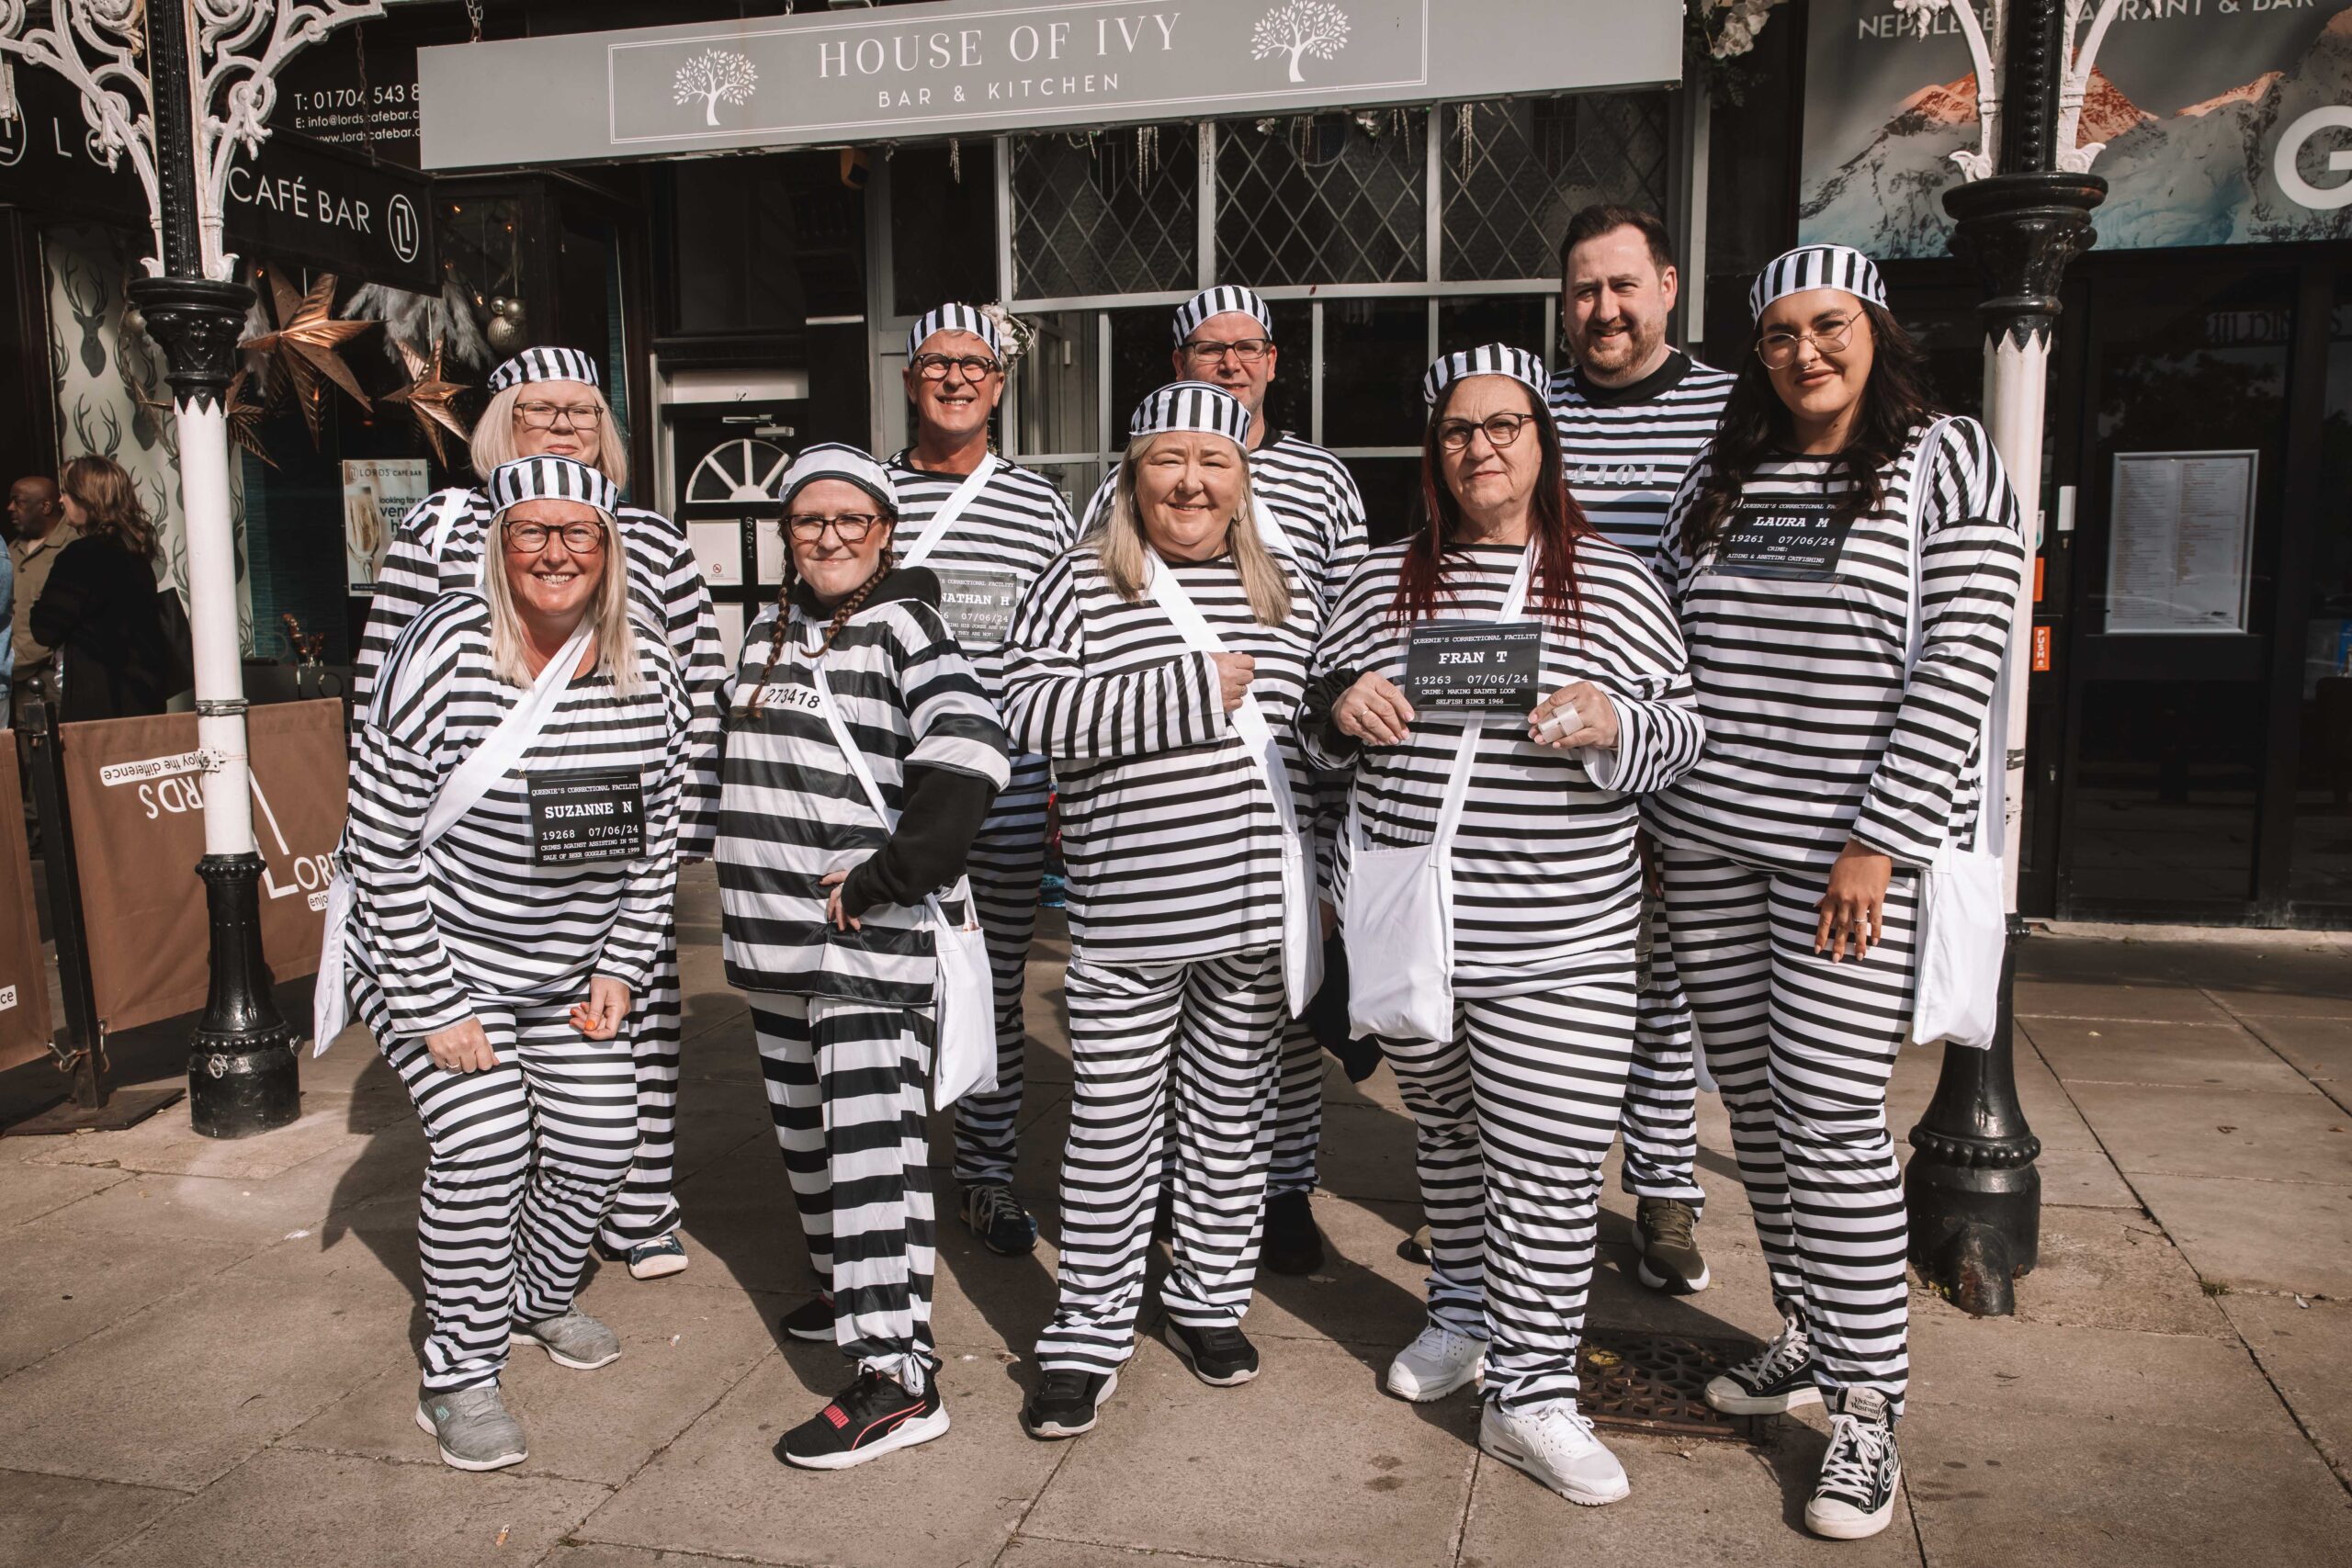 Twelve people have completed a bold escape from the cells at Southport Police Station in the annual Jail and Bail fundraiser for Queenscourt Hospice. Inmates outside the House Of Ivy on Lord Street in Southport 